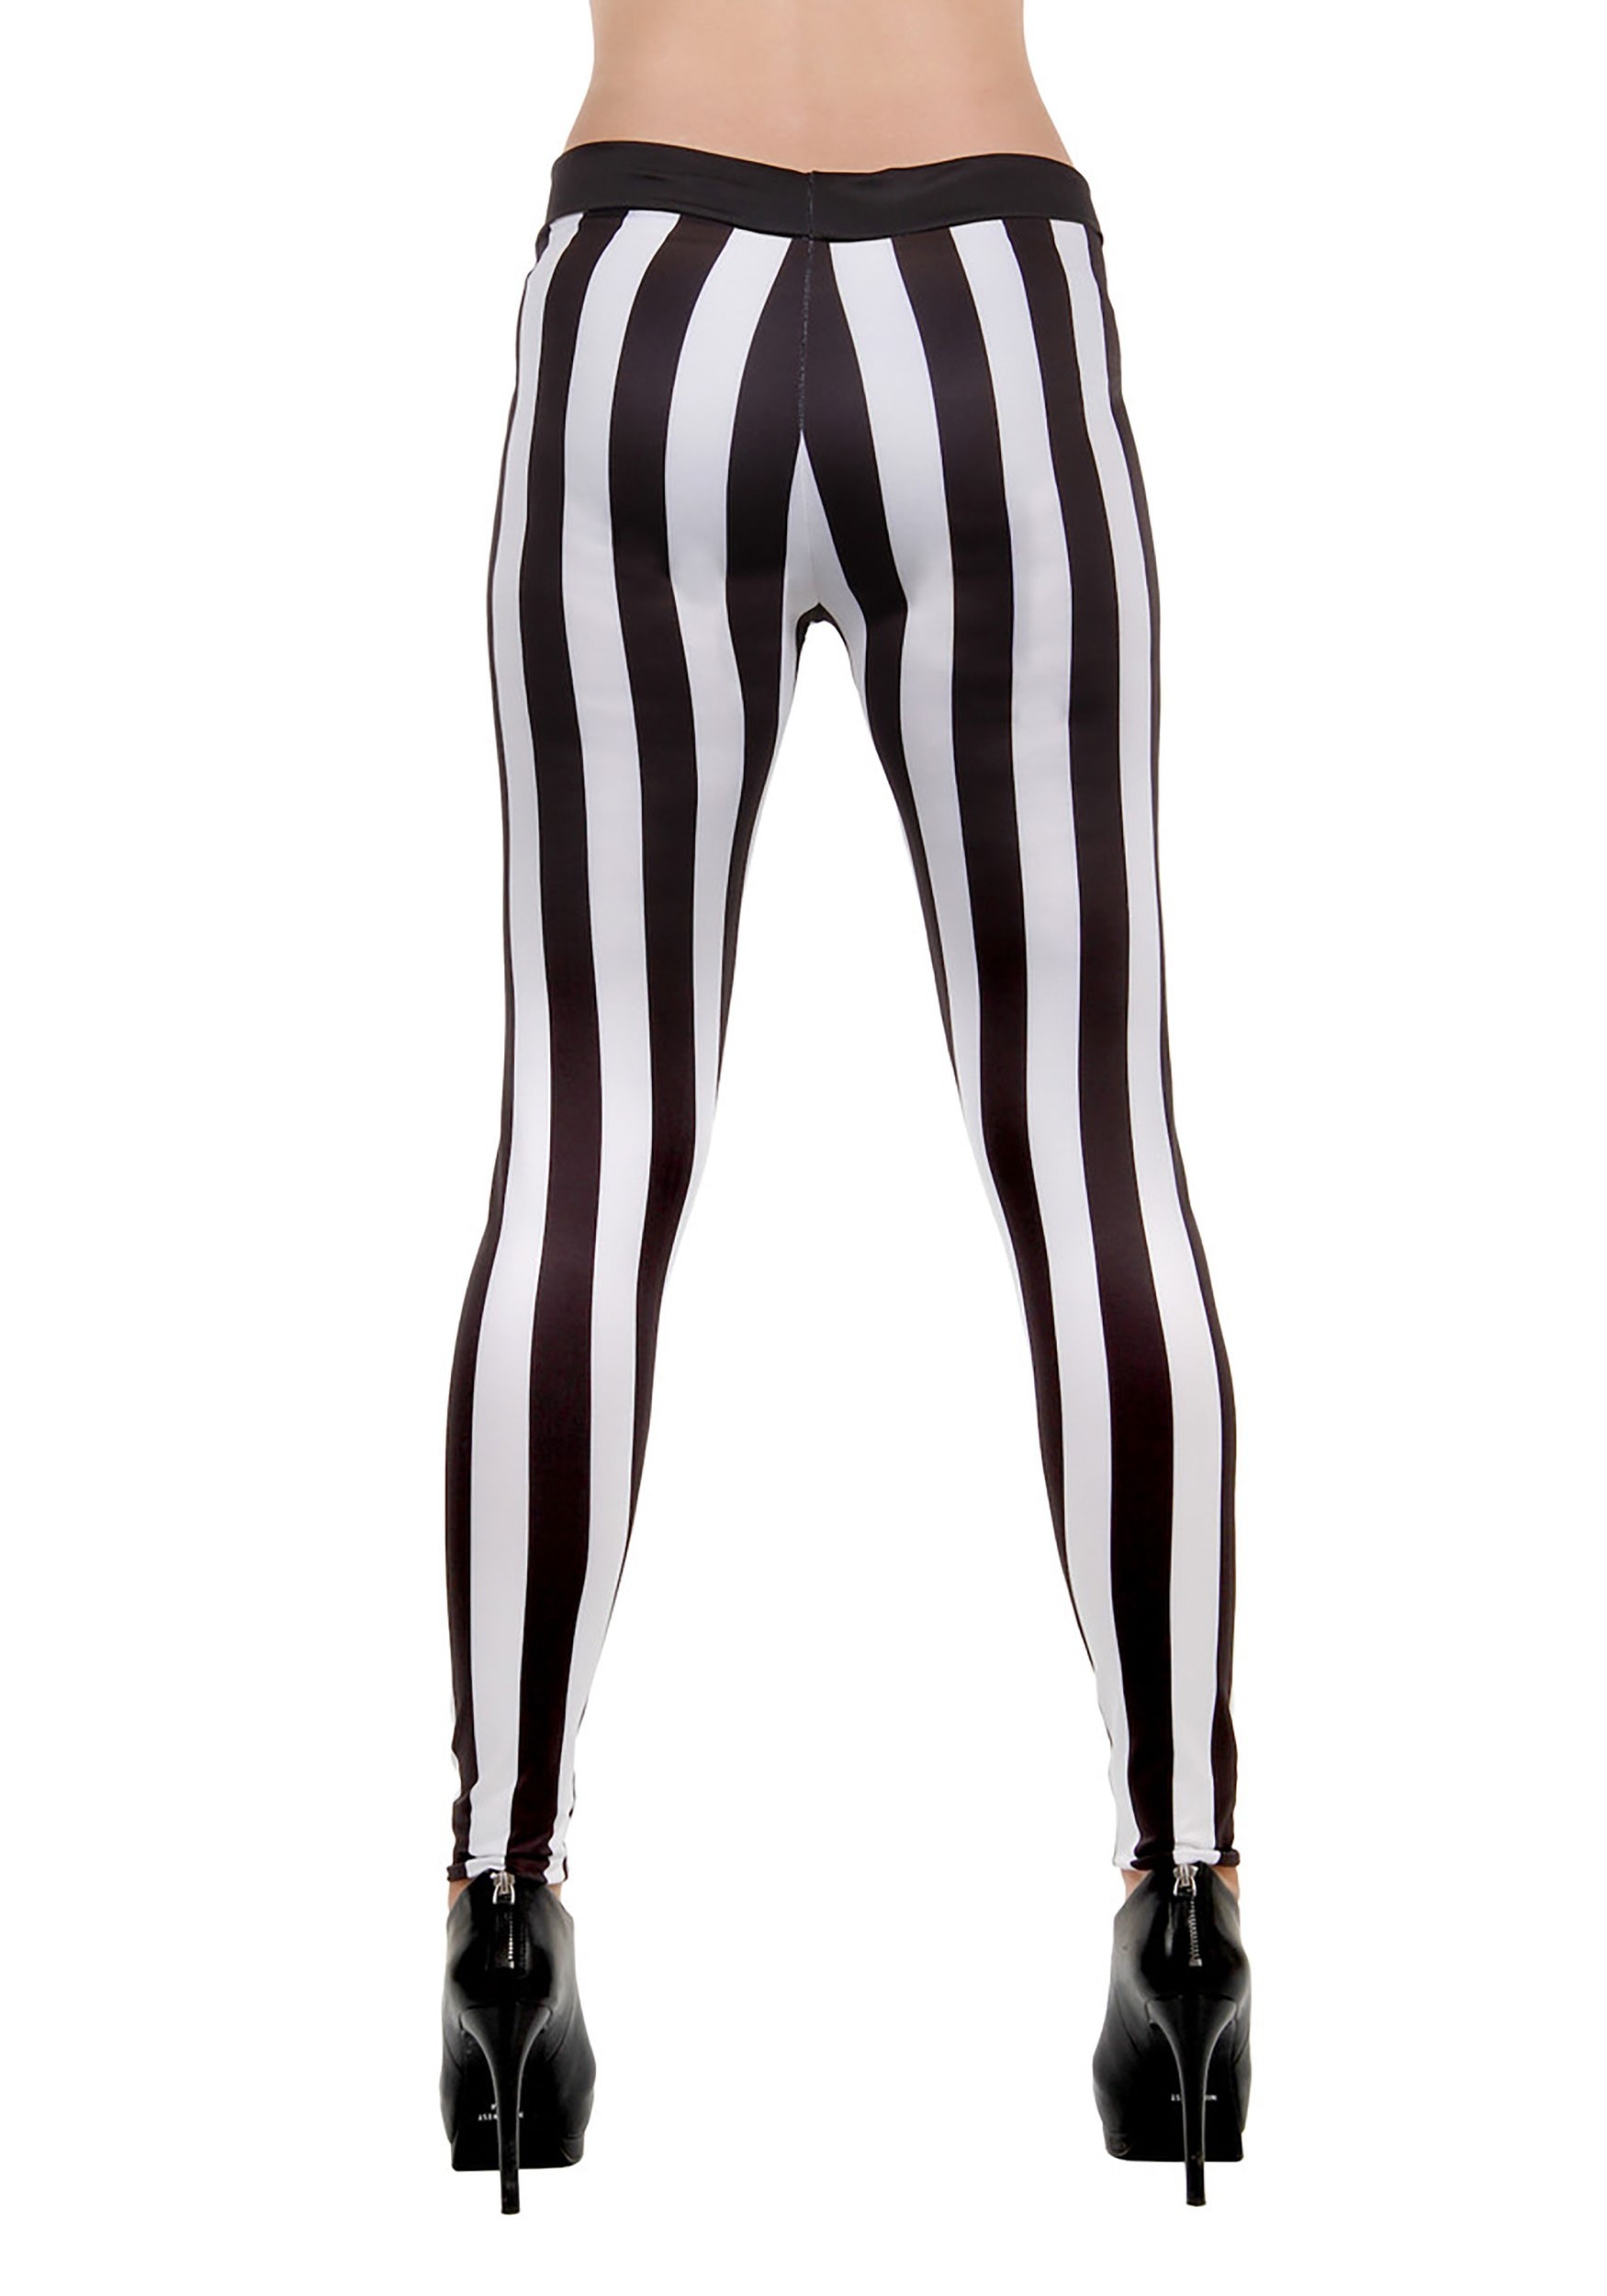 Black and White Vertical Striped Tights - Mounteen  Striped tights,  Leggings are not pants, Black and white pants